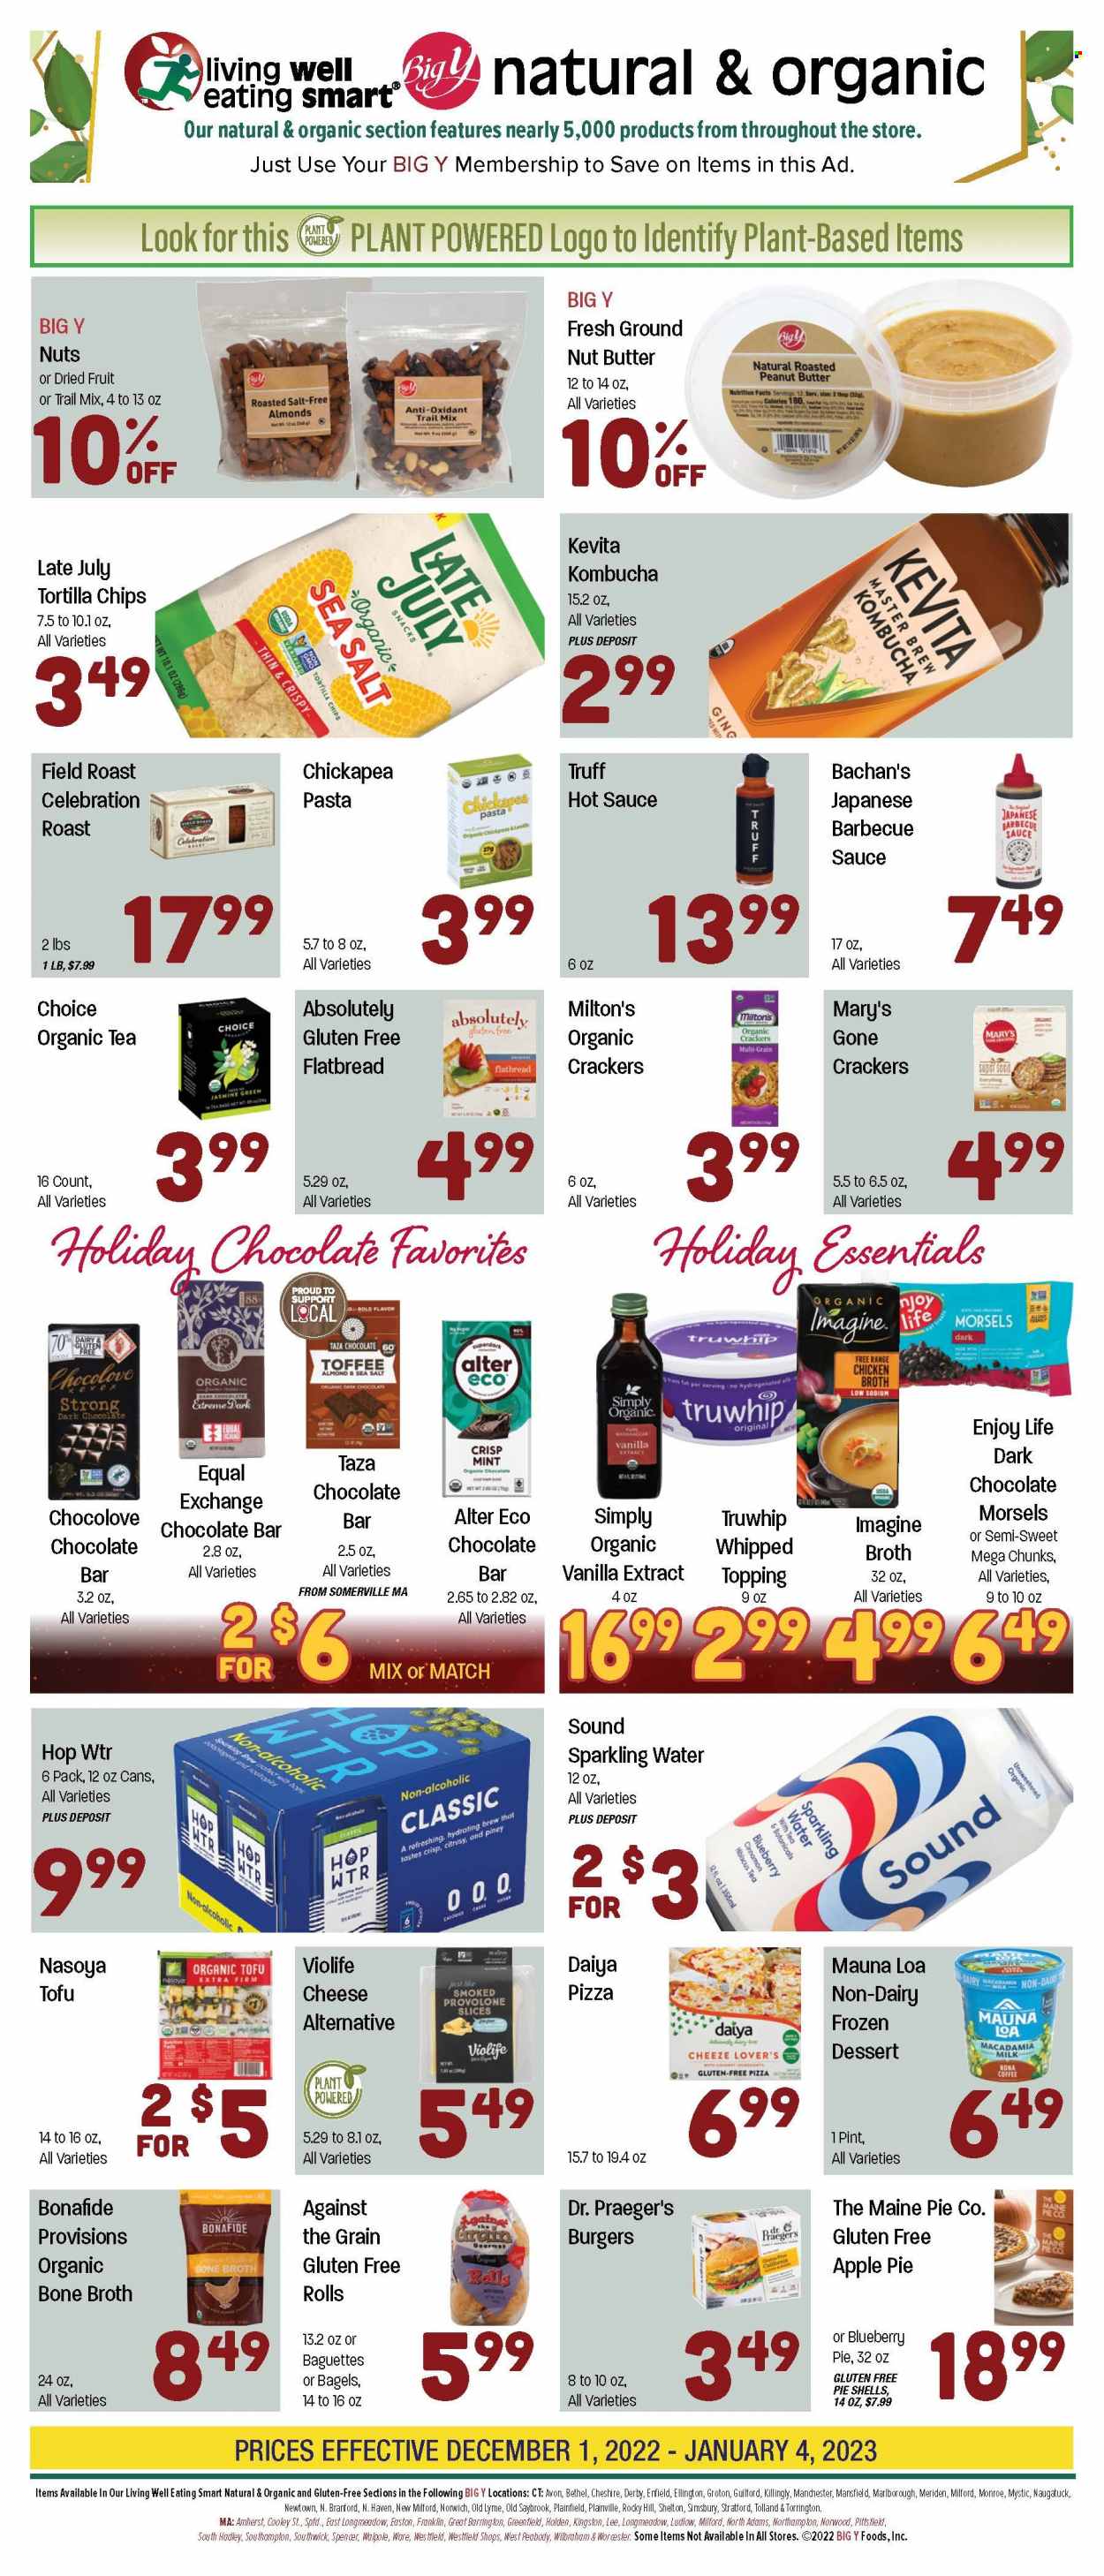 thumbnail - Big Y Flyer - 12/01/2022 - 12/07/2022 - Sales products - bagels, baguette, apple pie, fruit pie, pie crust, snack, pizza, hamburger, pasta, cheese, tofu, Provolone, milk, frozen dessert, Celebration, crackers, dark chocolate, chocolate bar, bars, tortilla chips, chicken broth, topping, broth, vanilla extract, mint, BBQ sauce, hot sauce, nut butter, roasted peanuts, dried fruit, trail mix, sparkling water, water, kombucha, KeVita, tea, coffee, Avon. Page 2.